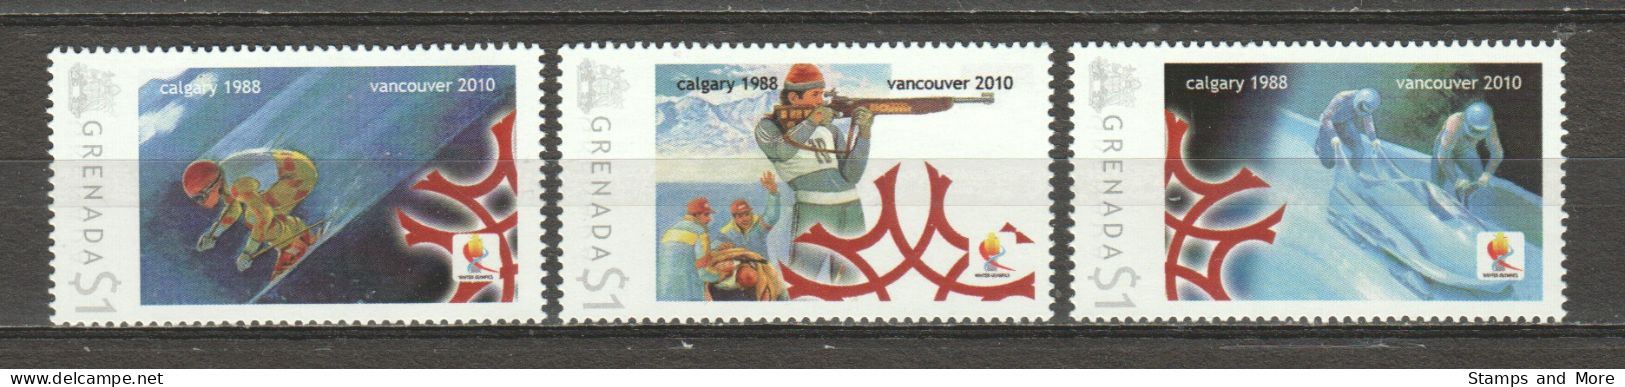 Grenada - Limited Edition Serie 15 MNH - WINTER OLYMPICS VANCOUVER 2010 - CALGARY 1988 - Invierno 2010: Vancouver